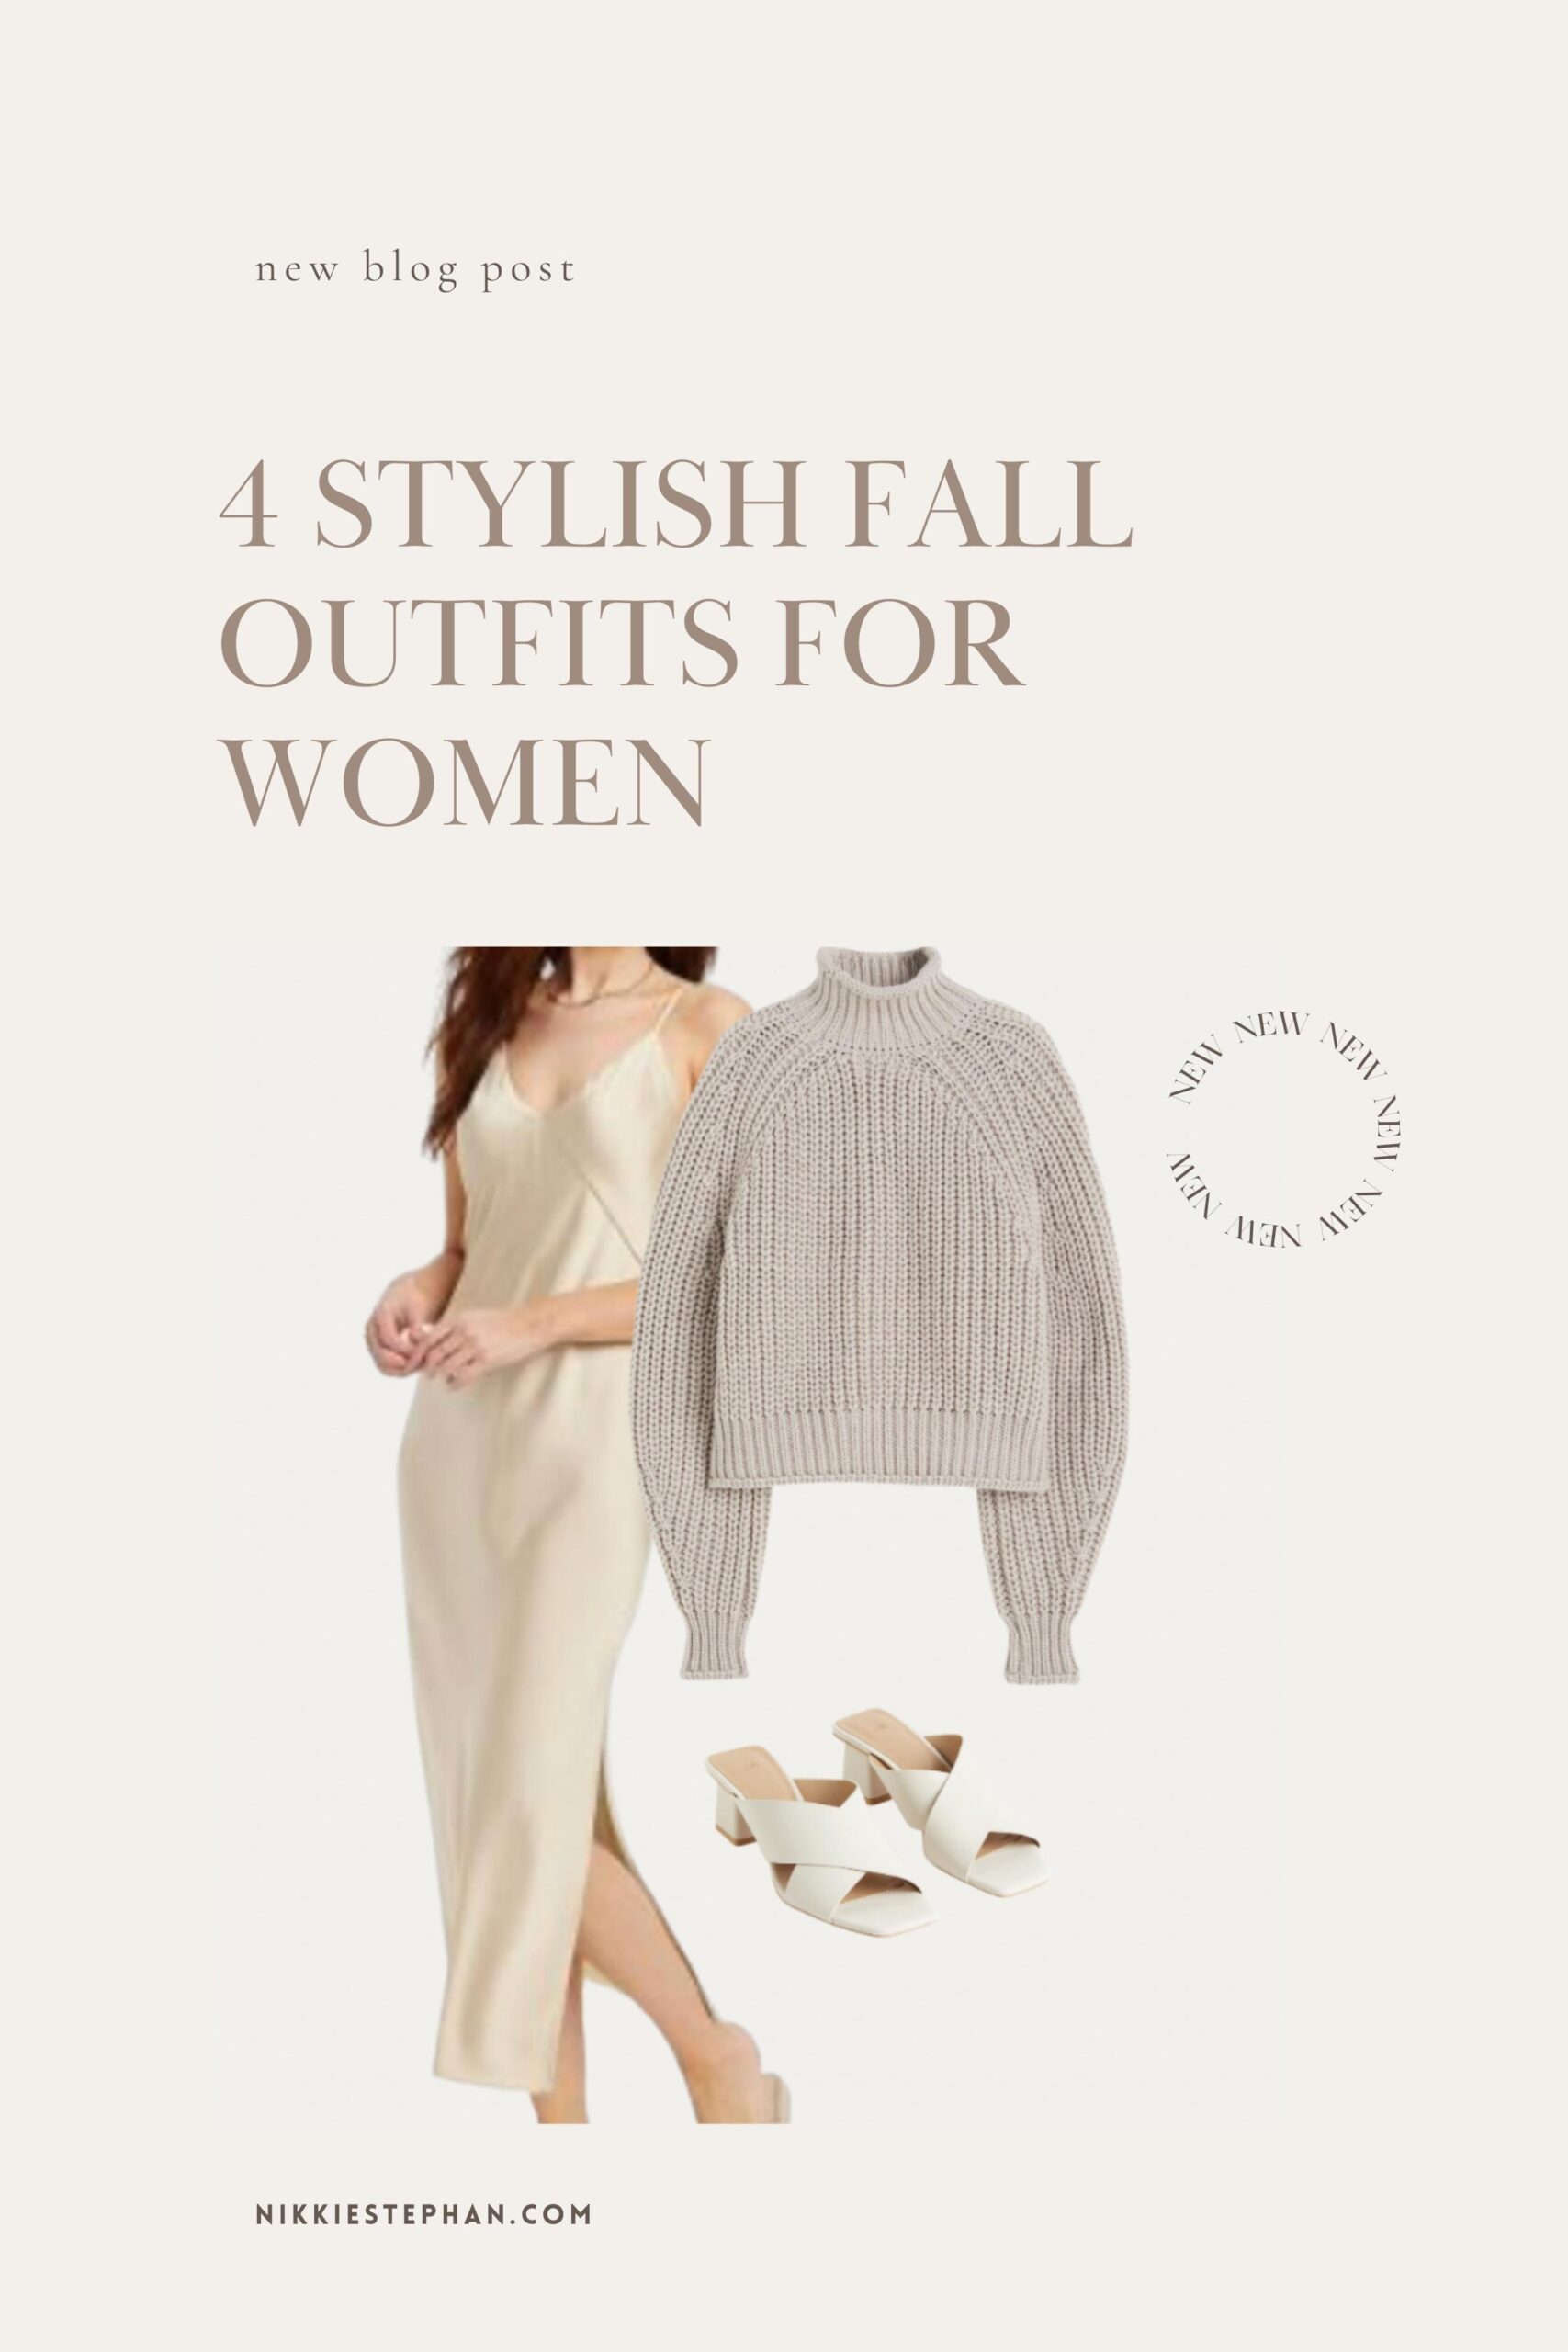 4 STYLISH FALL OUTFITS FOR WOMEN